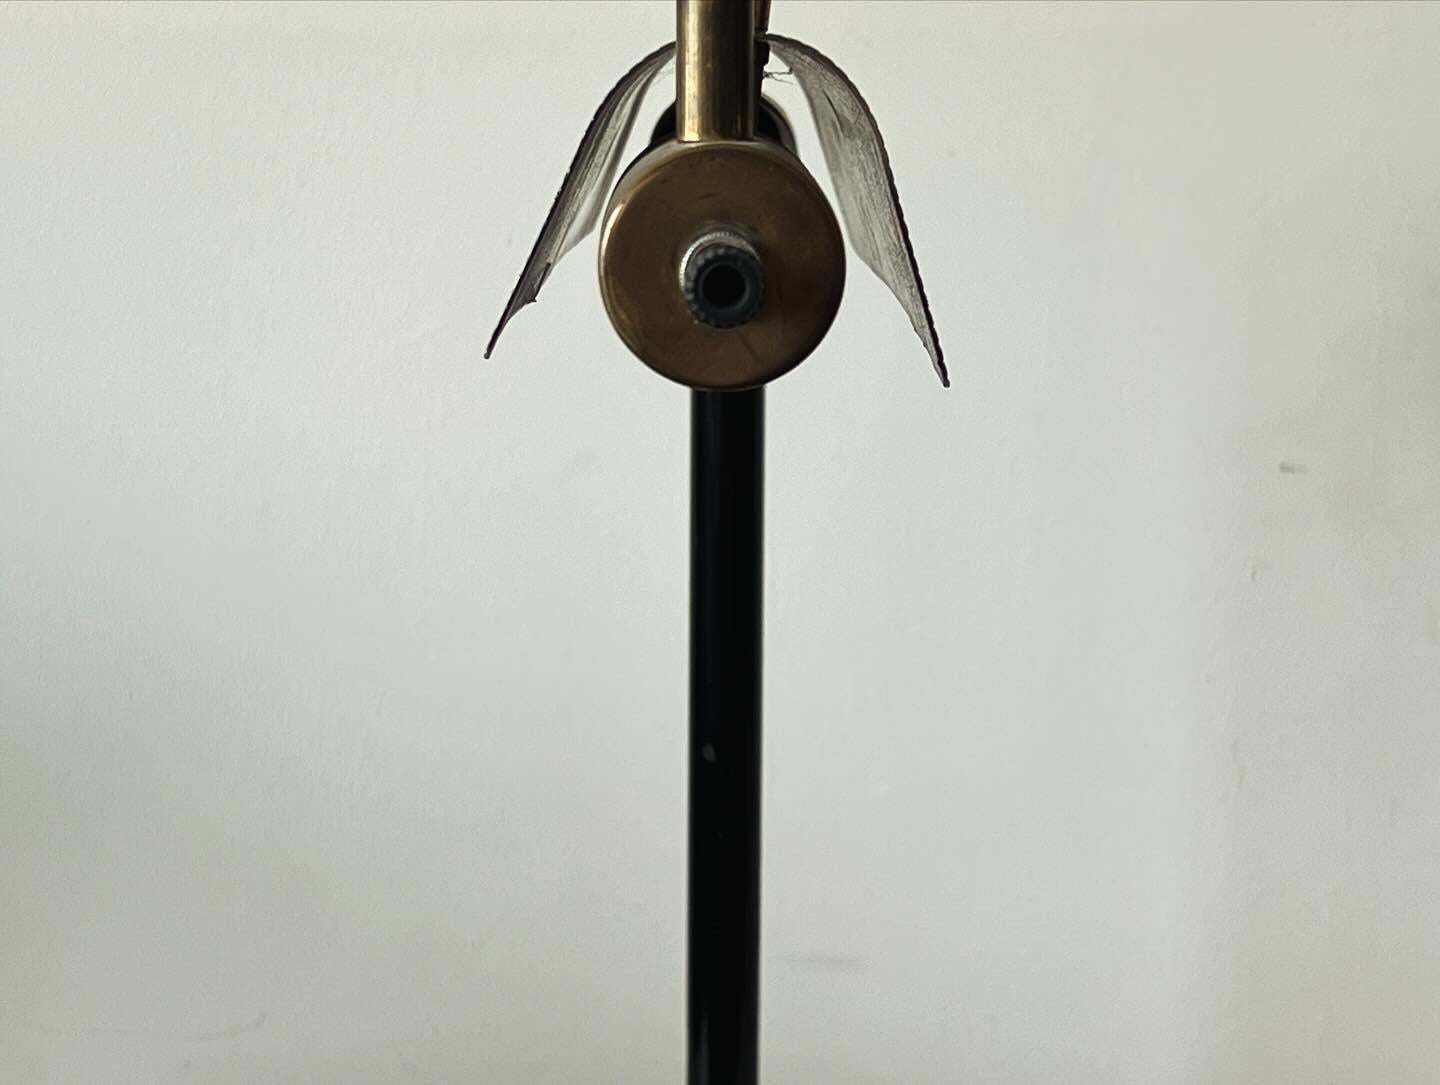 A rare  and unusual modernist lamp by Peter Pfisterer, ca' 1940's. Shade pivots to aim light and height is adjustable. Made of brass and painted aluminium. The Swiss born architect, Peter Pfisterer studied and trained in Europe before moving to Los